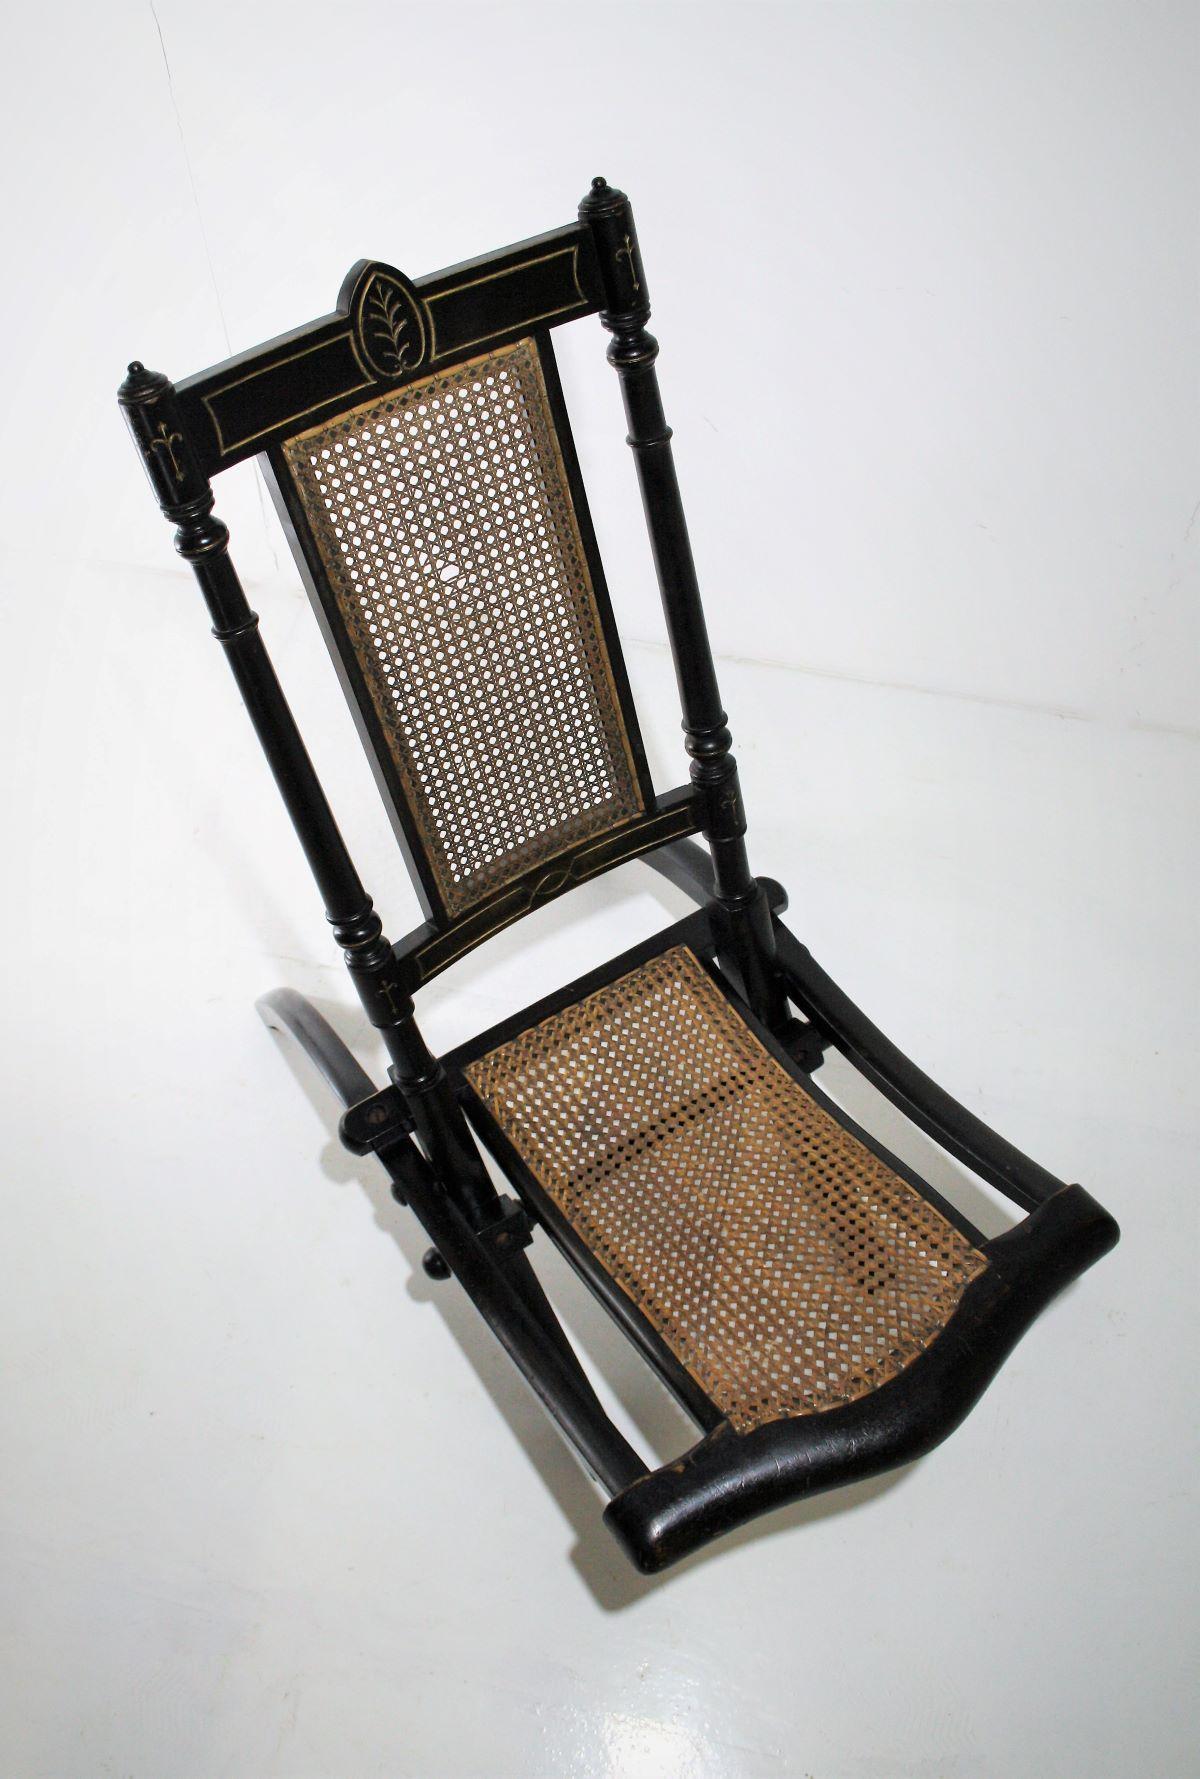 British Decorative Folding Victorian Chair with Cane Seat Ebonised with Gilt detailing